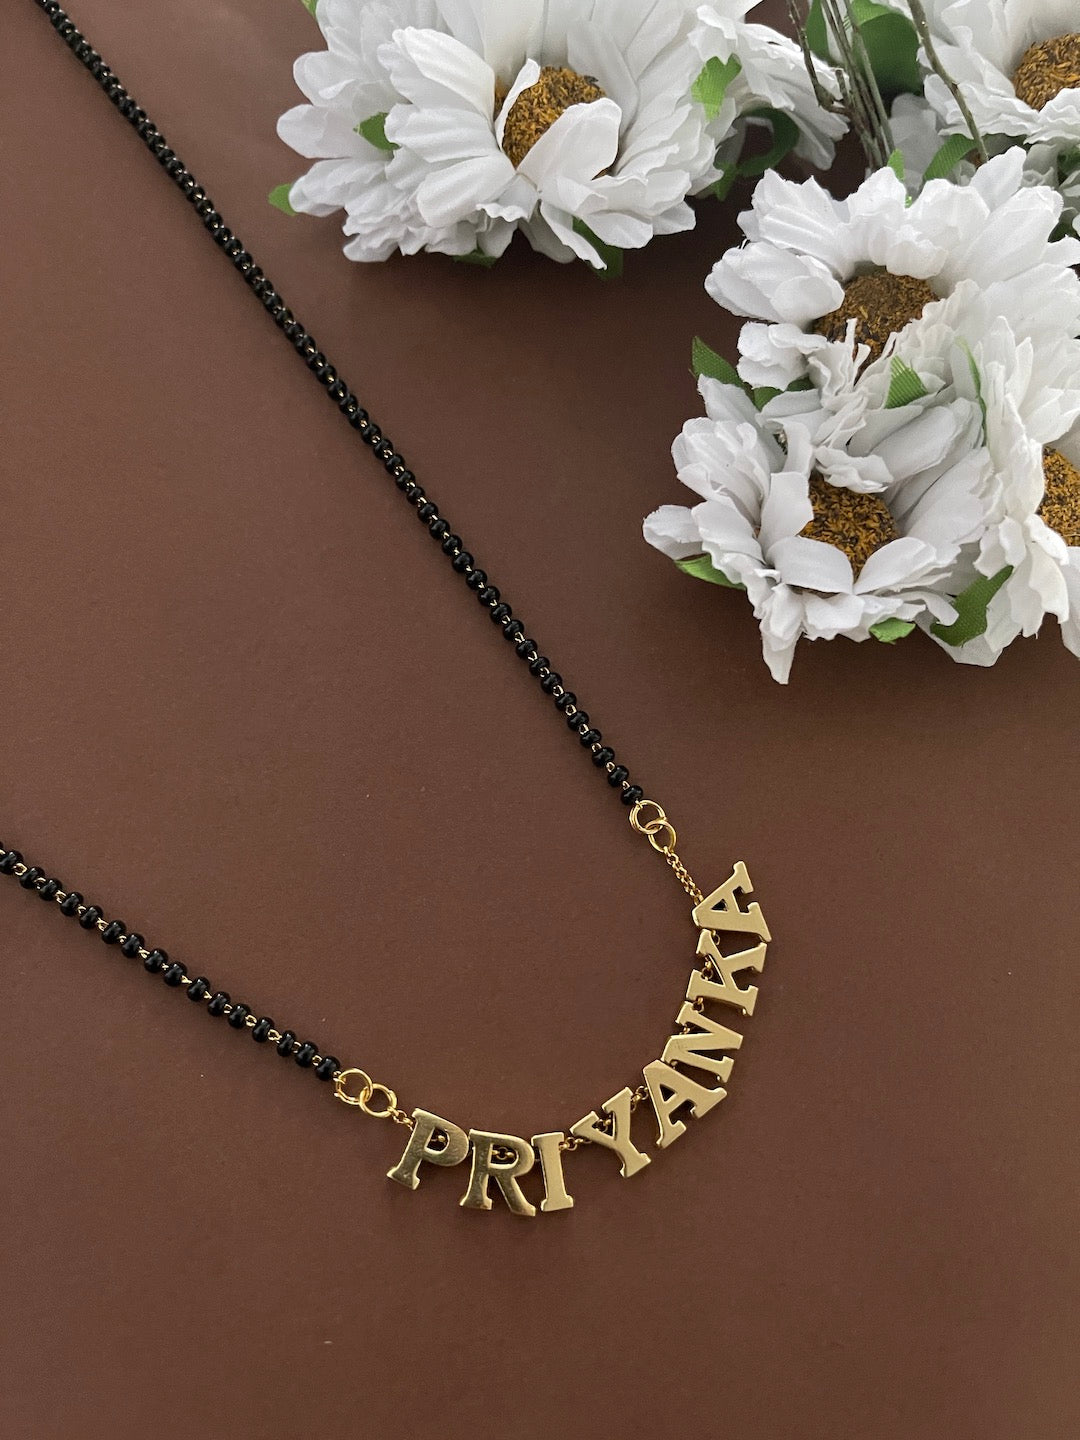 Gold Name Mangalsutra With Traditional Black Beads Chain | Short Mangalsutra